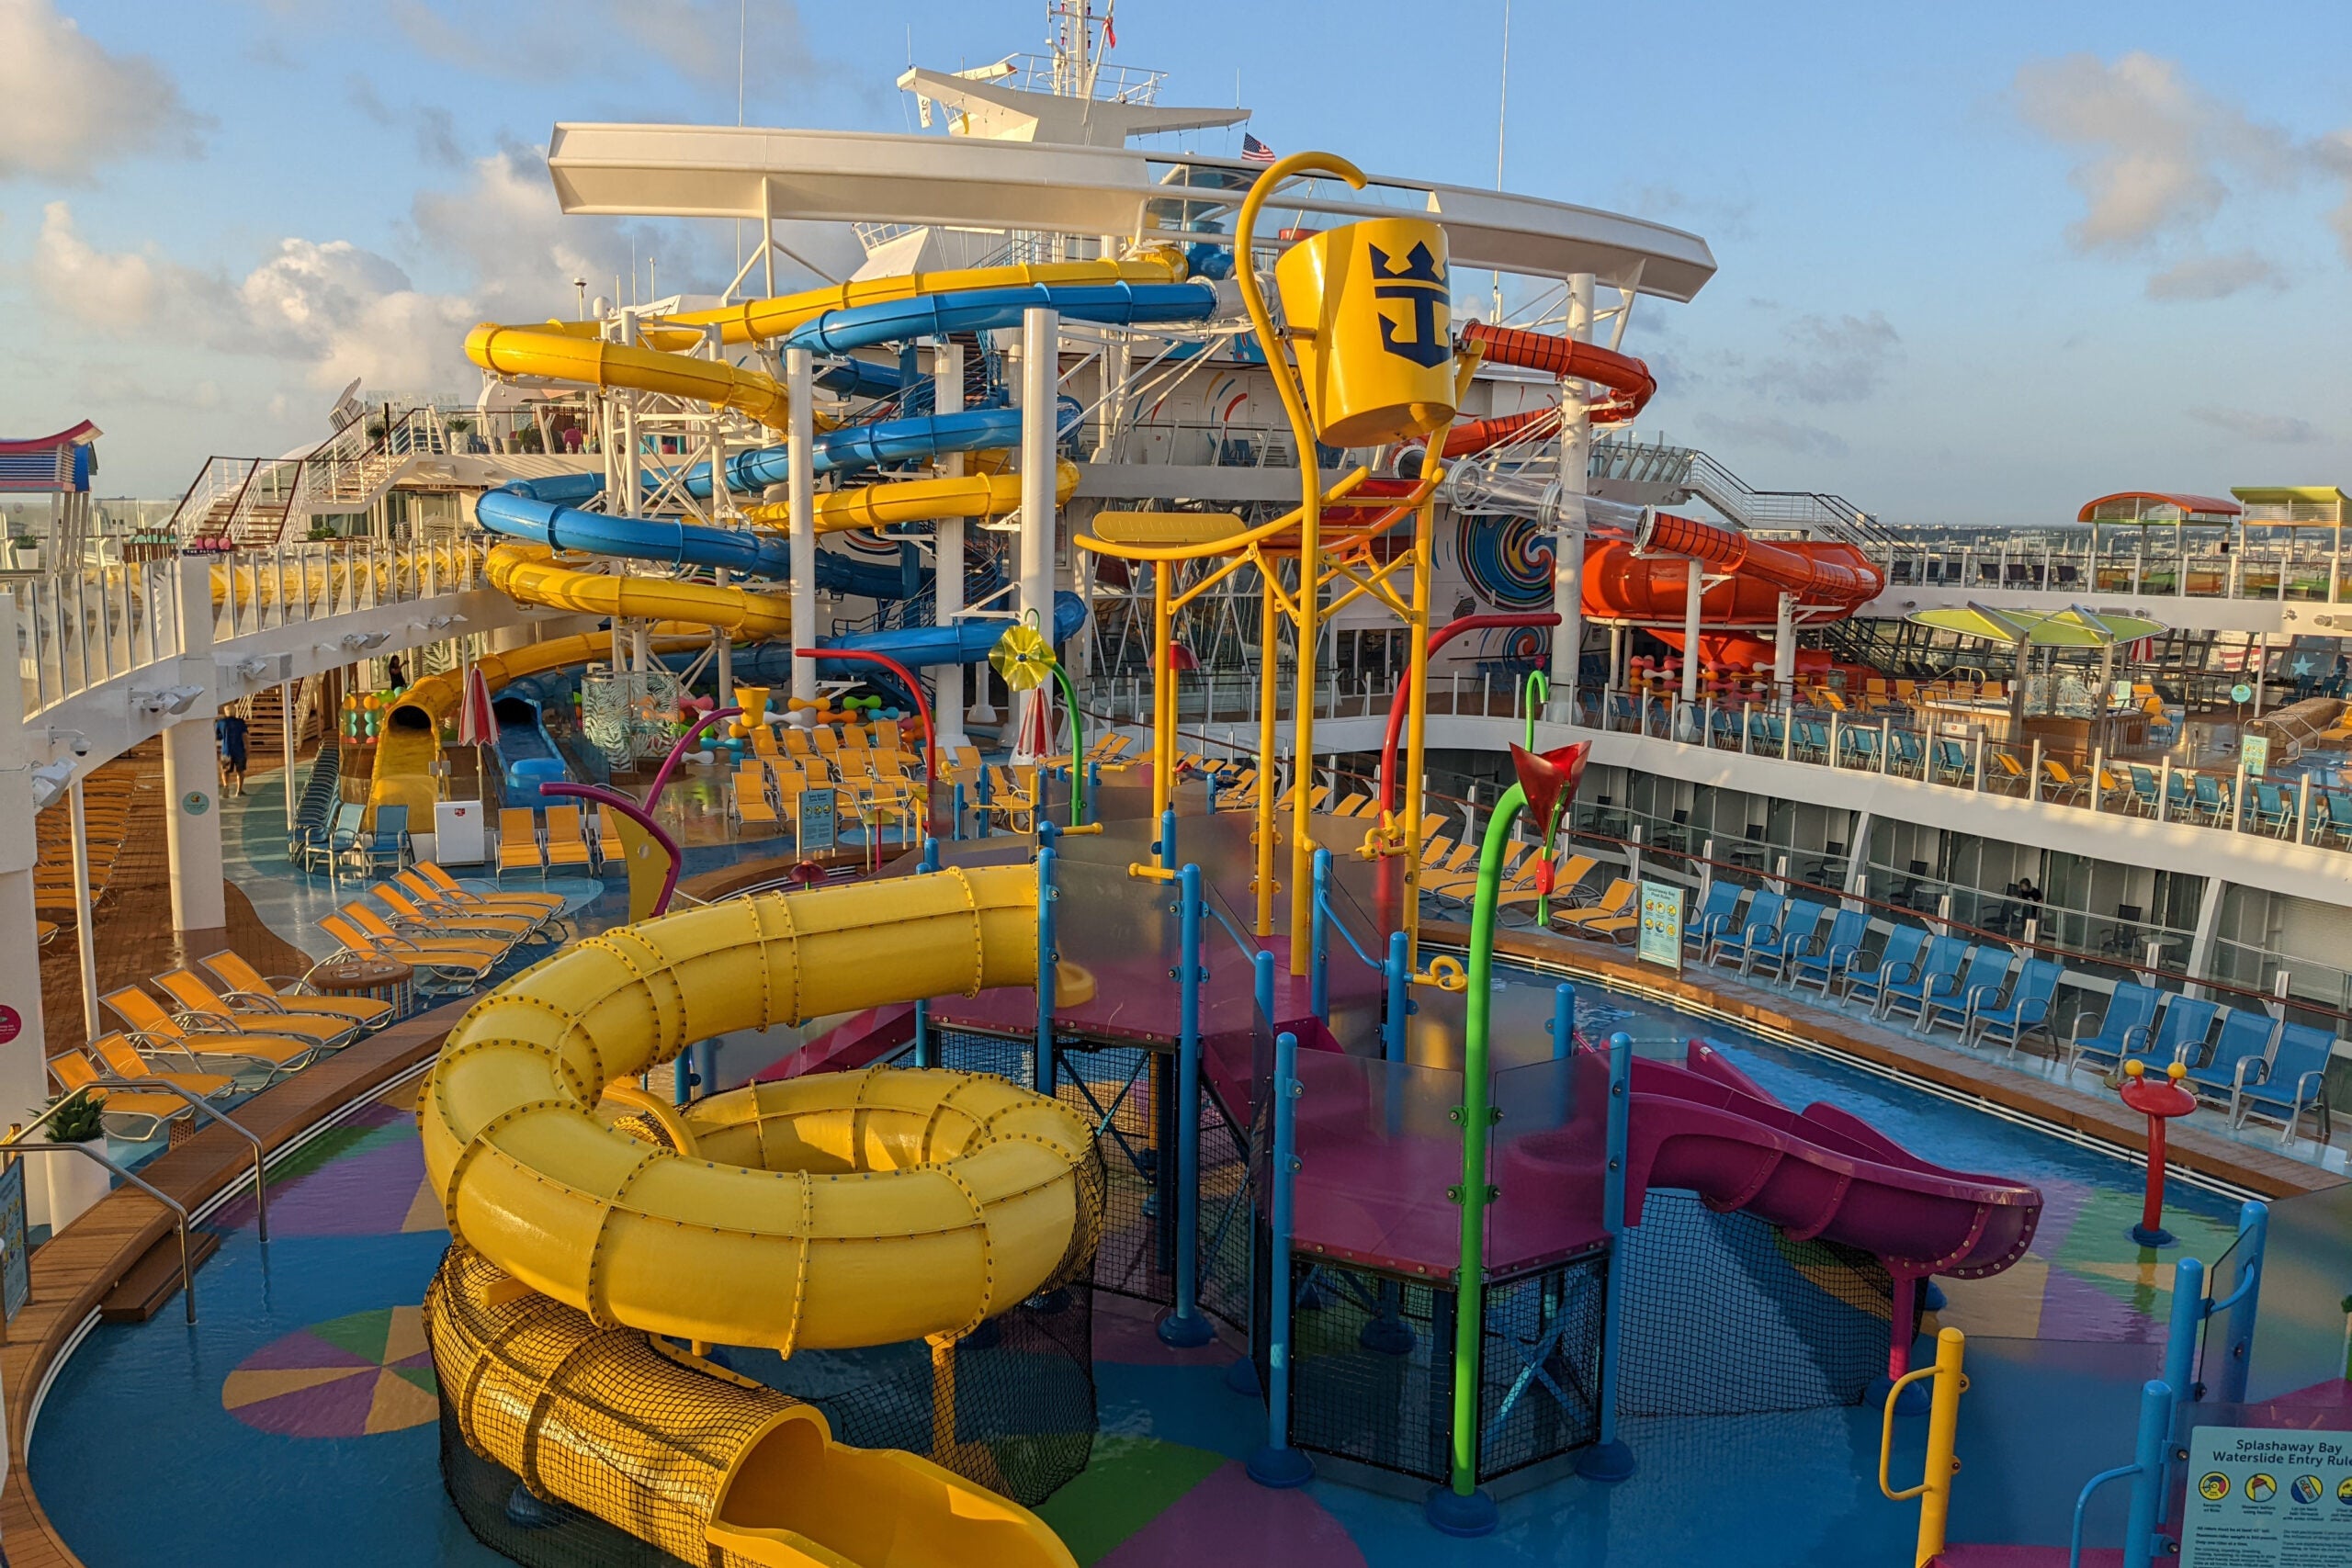 Splash park and water slides on top deck of a cruise ship